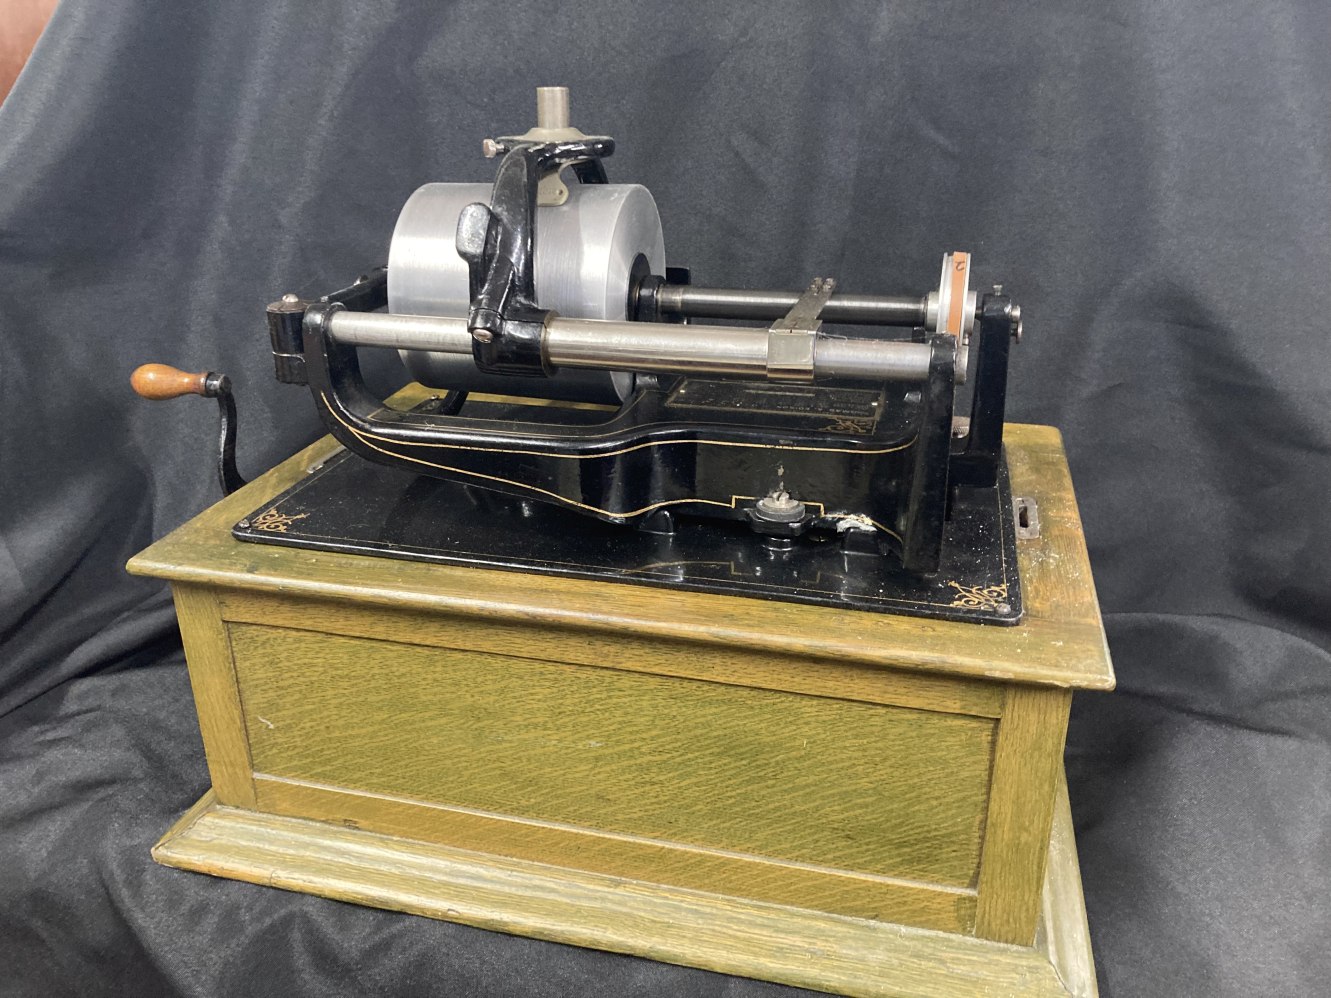 Mechanical Music Property of Local Collector. Edison Duplex Cylinder Phonograph serial no. C10576 - Image 6 of 9